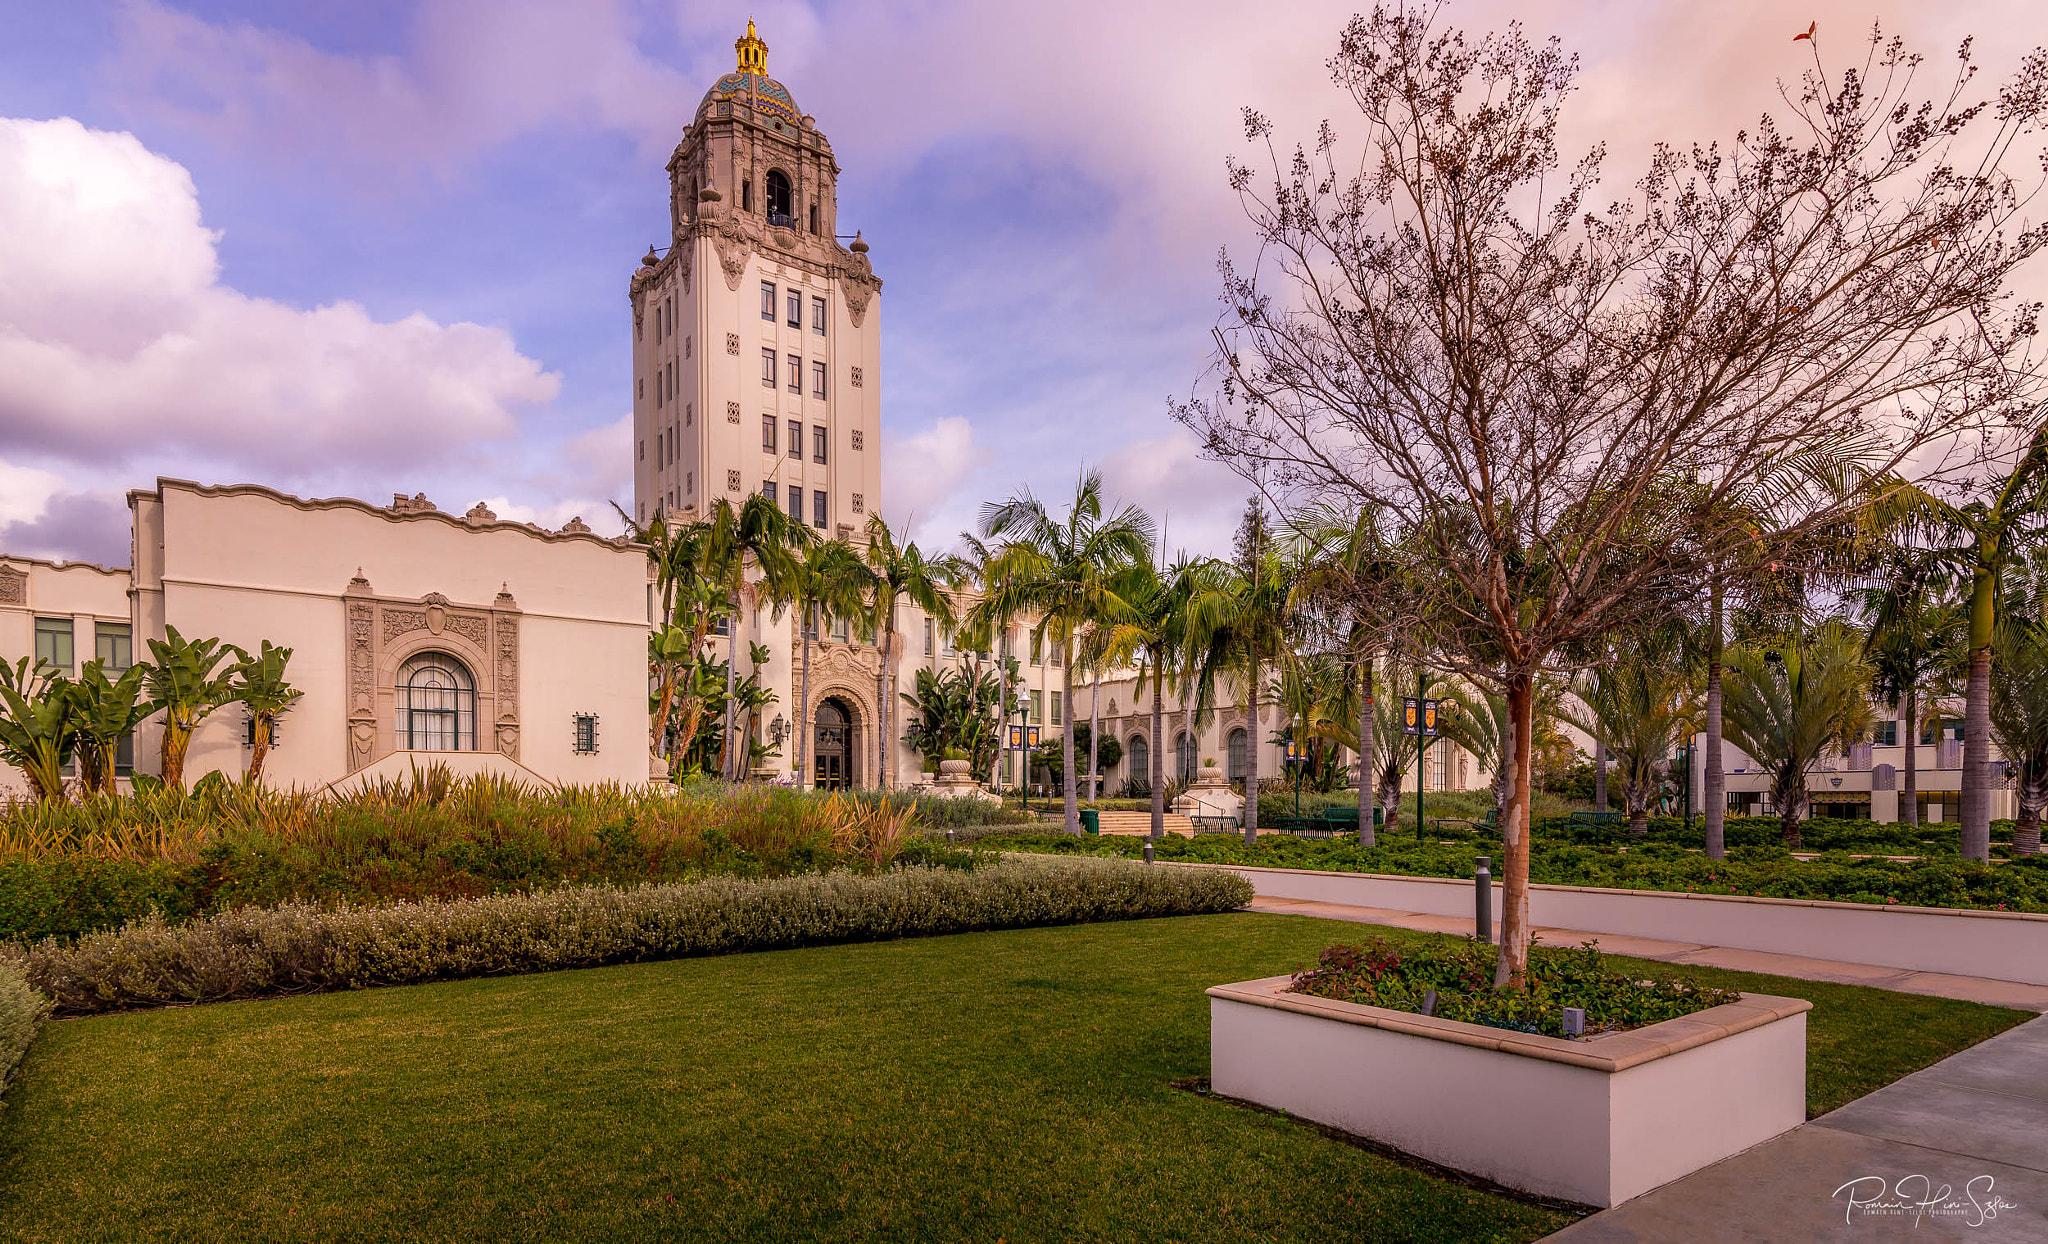 Nikon D610 sample photo. City hall of beverly hills photography